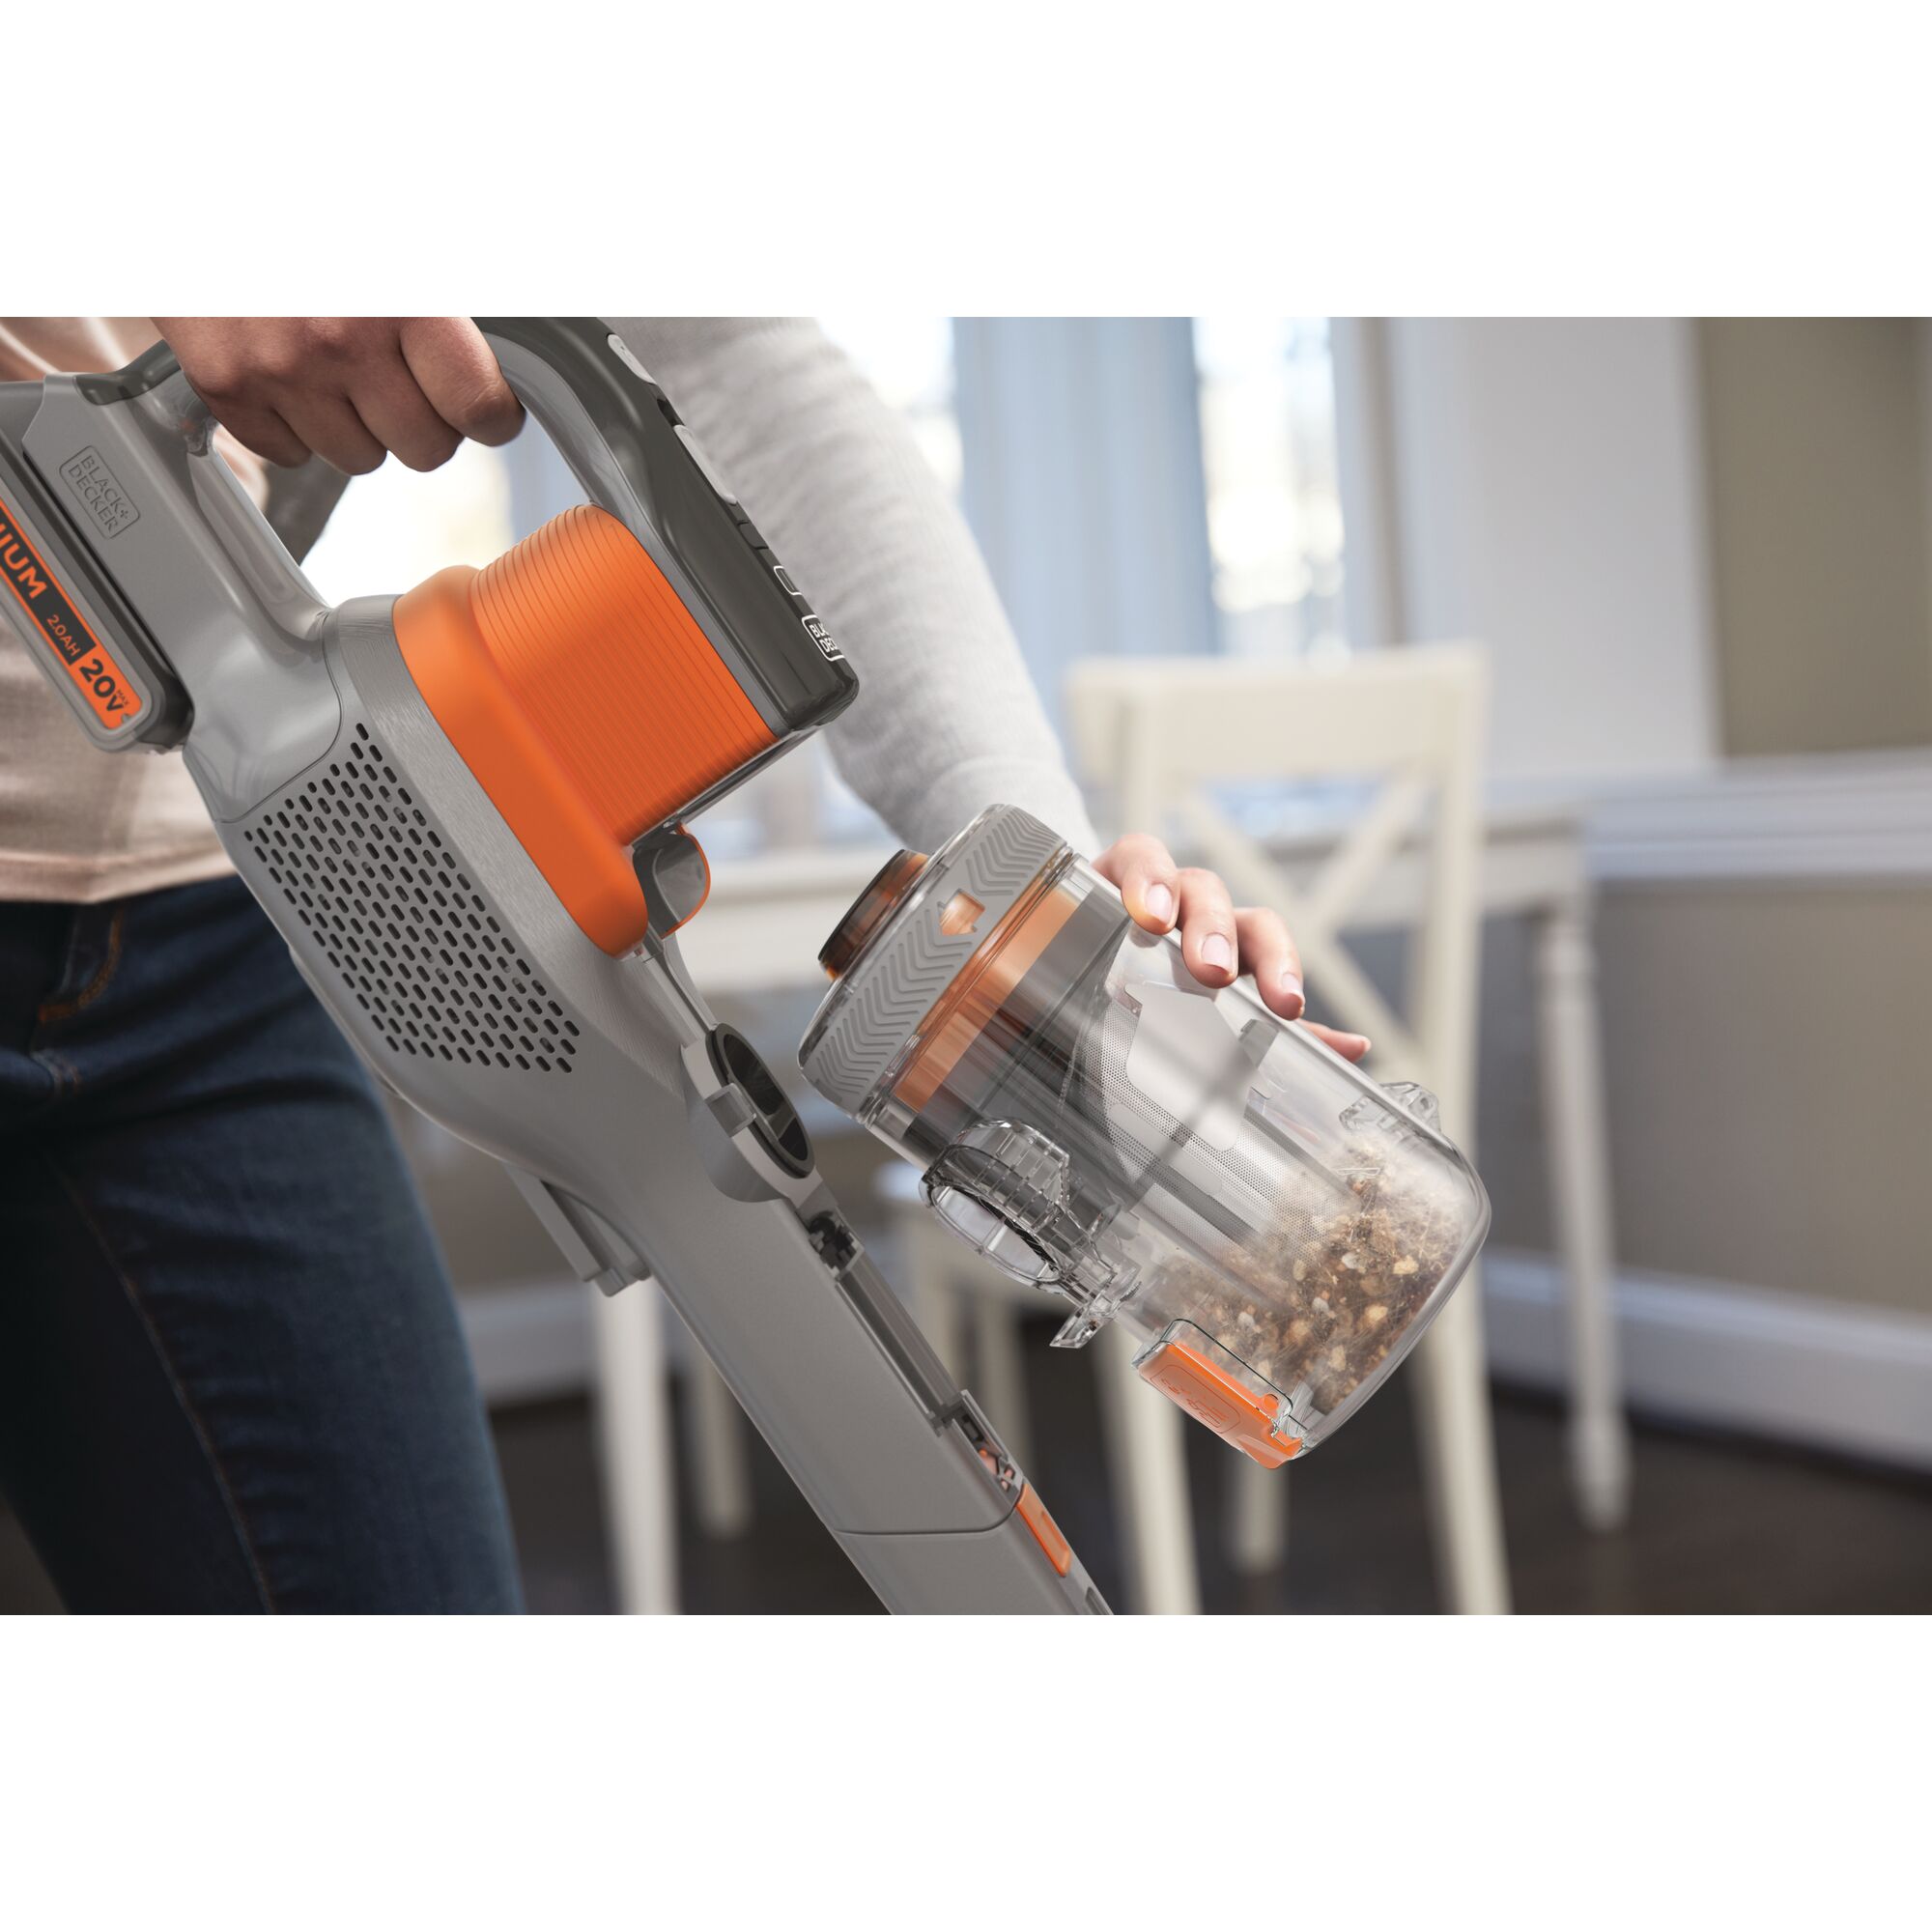 Easy empty dustbin feature of POWER SERIES Extreme Cordless Stick Vacuum Cleaner.